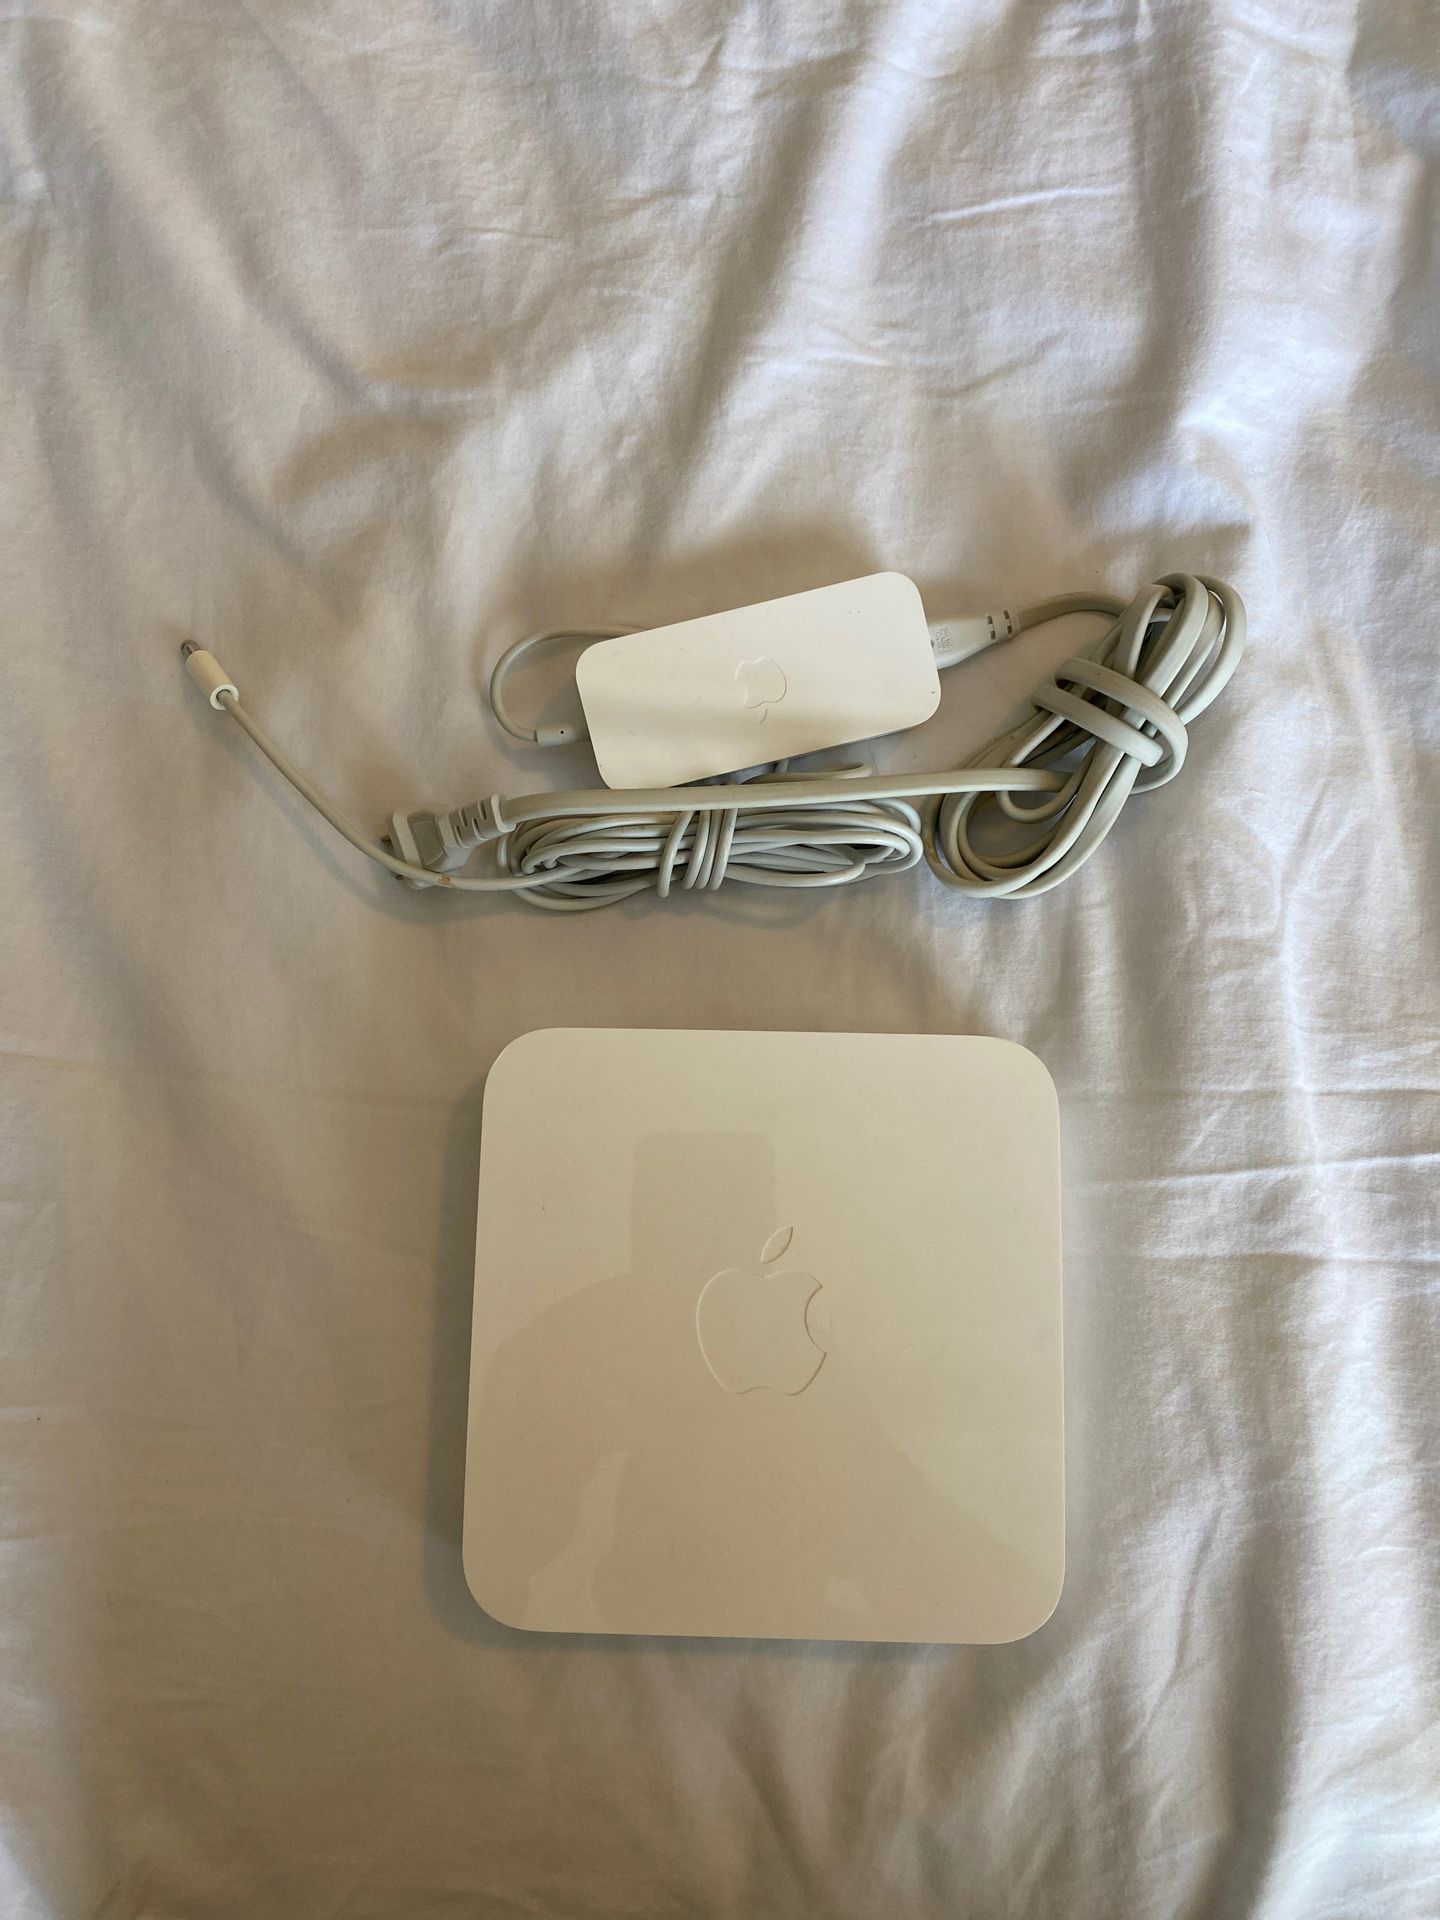 Apple AirPort Extreme base station WiFi router